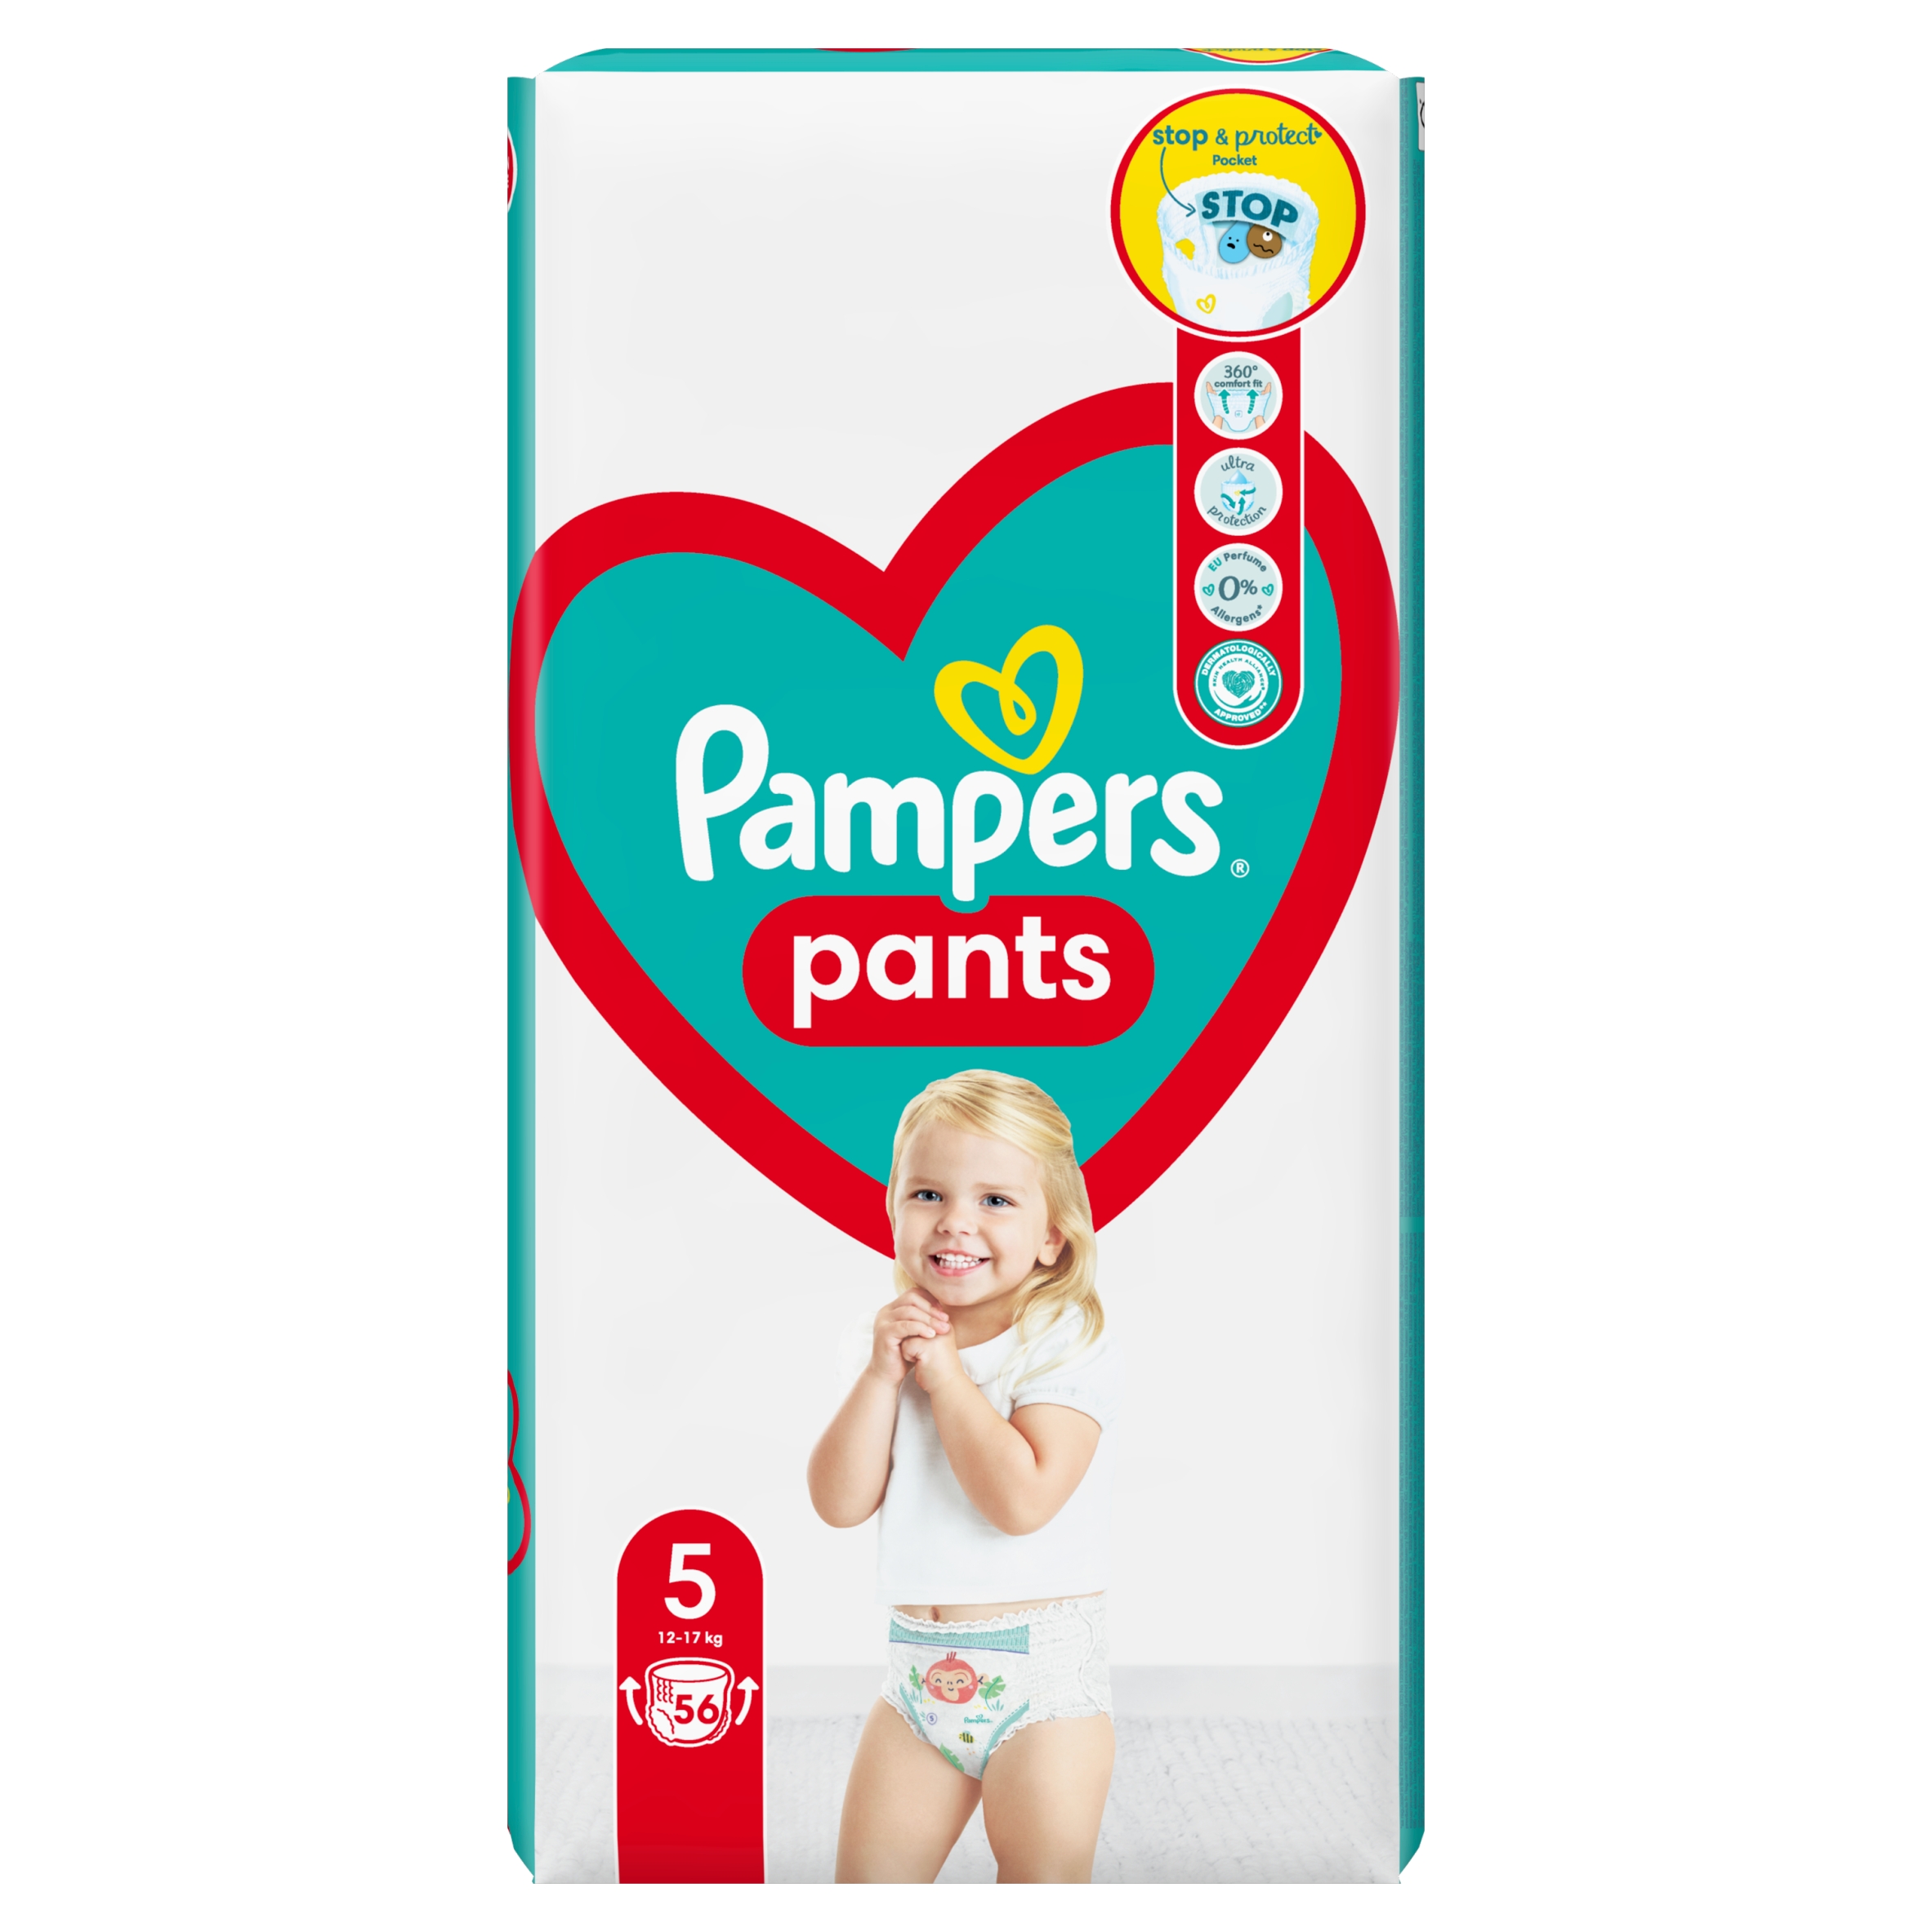 brother mfc j220 pampers